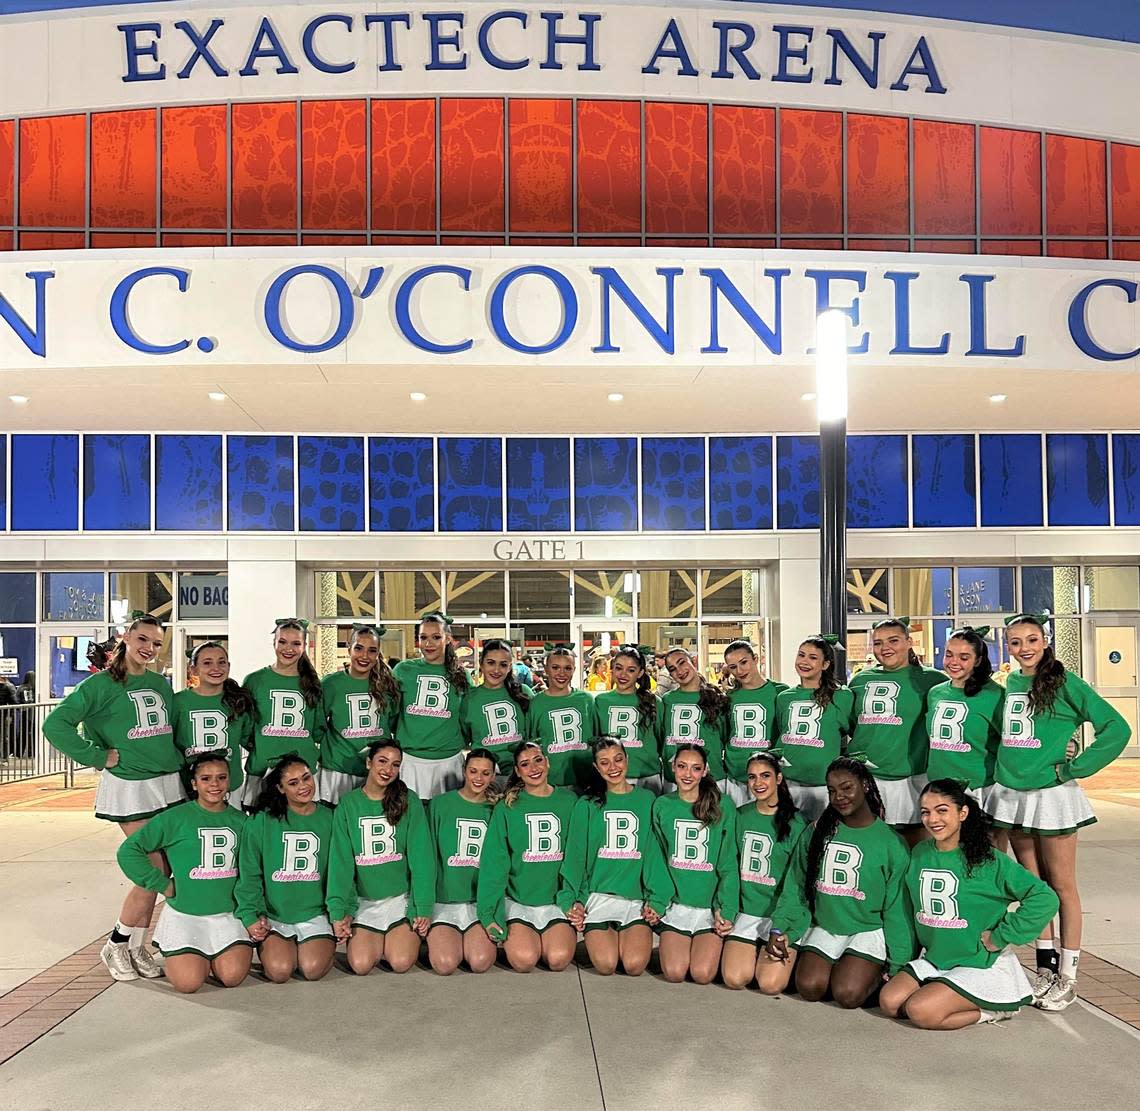 The St. Brendan cheerleading team placed second at state.